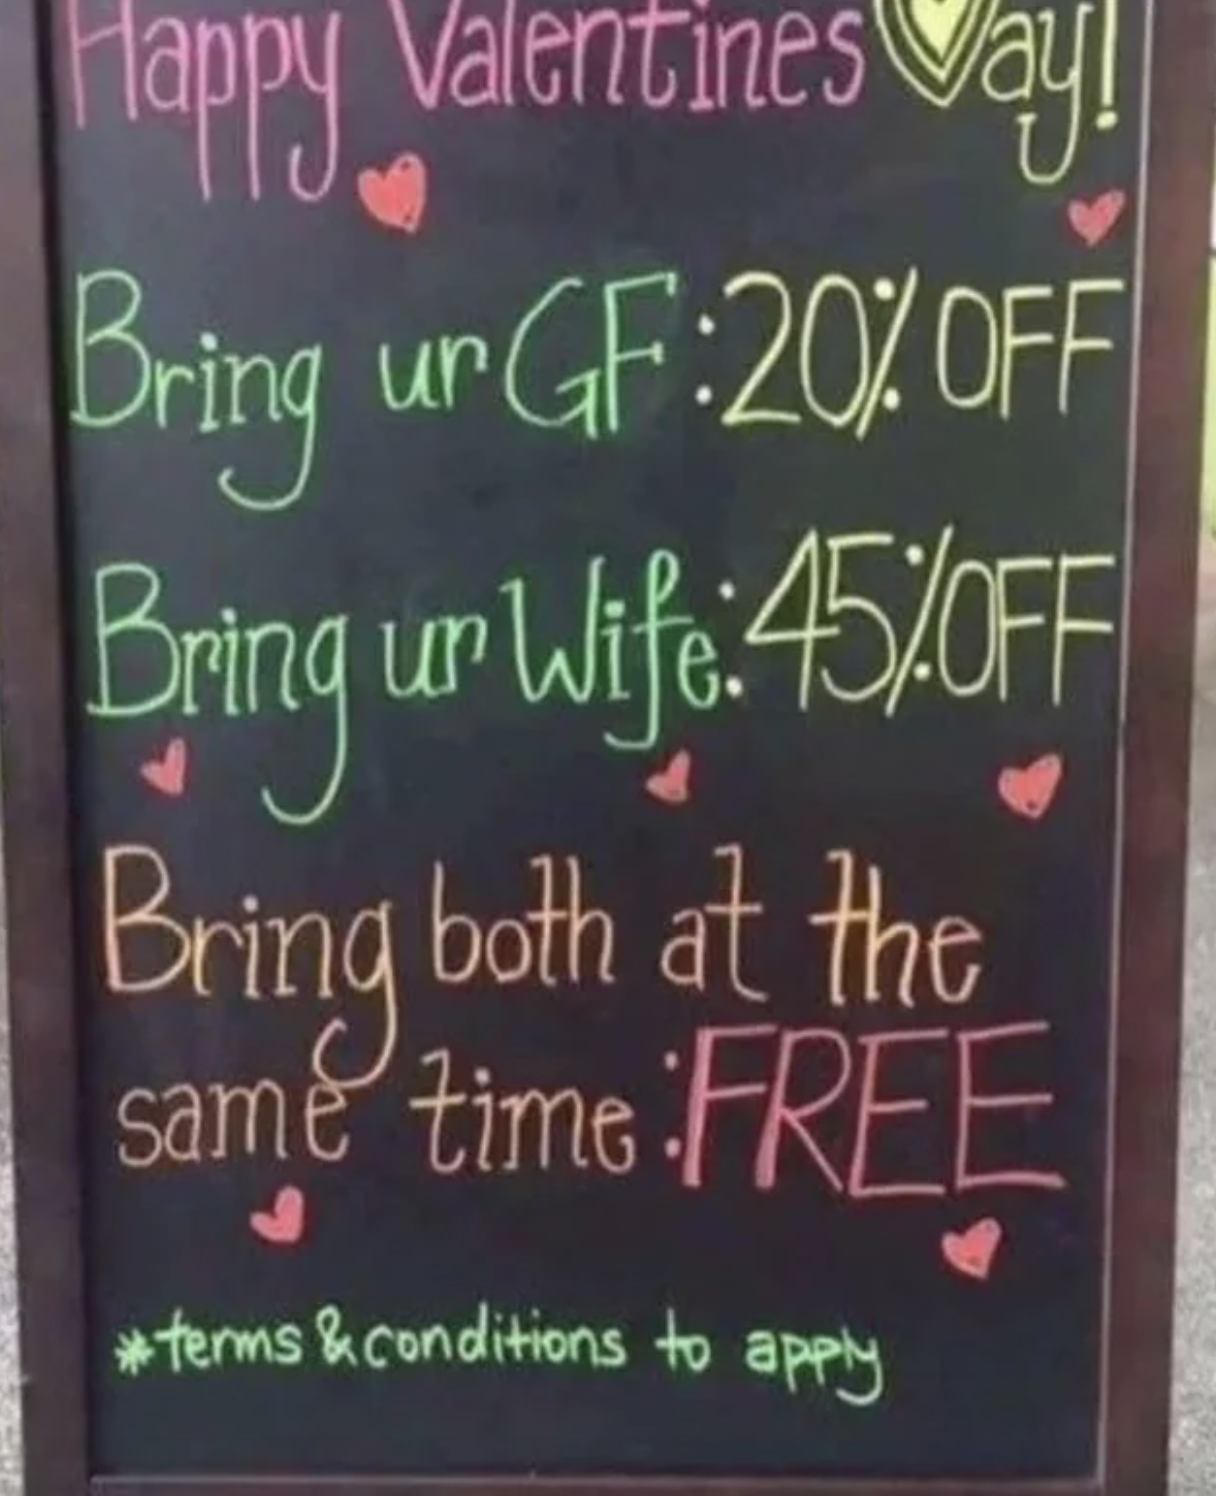 Blackboard with a Valentine&#x27;s Day offer, giving discounts based on relationship status, humorously suggesting a free offer for bringing both a girlfriend and wife. Terms and conditions apply